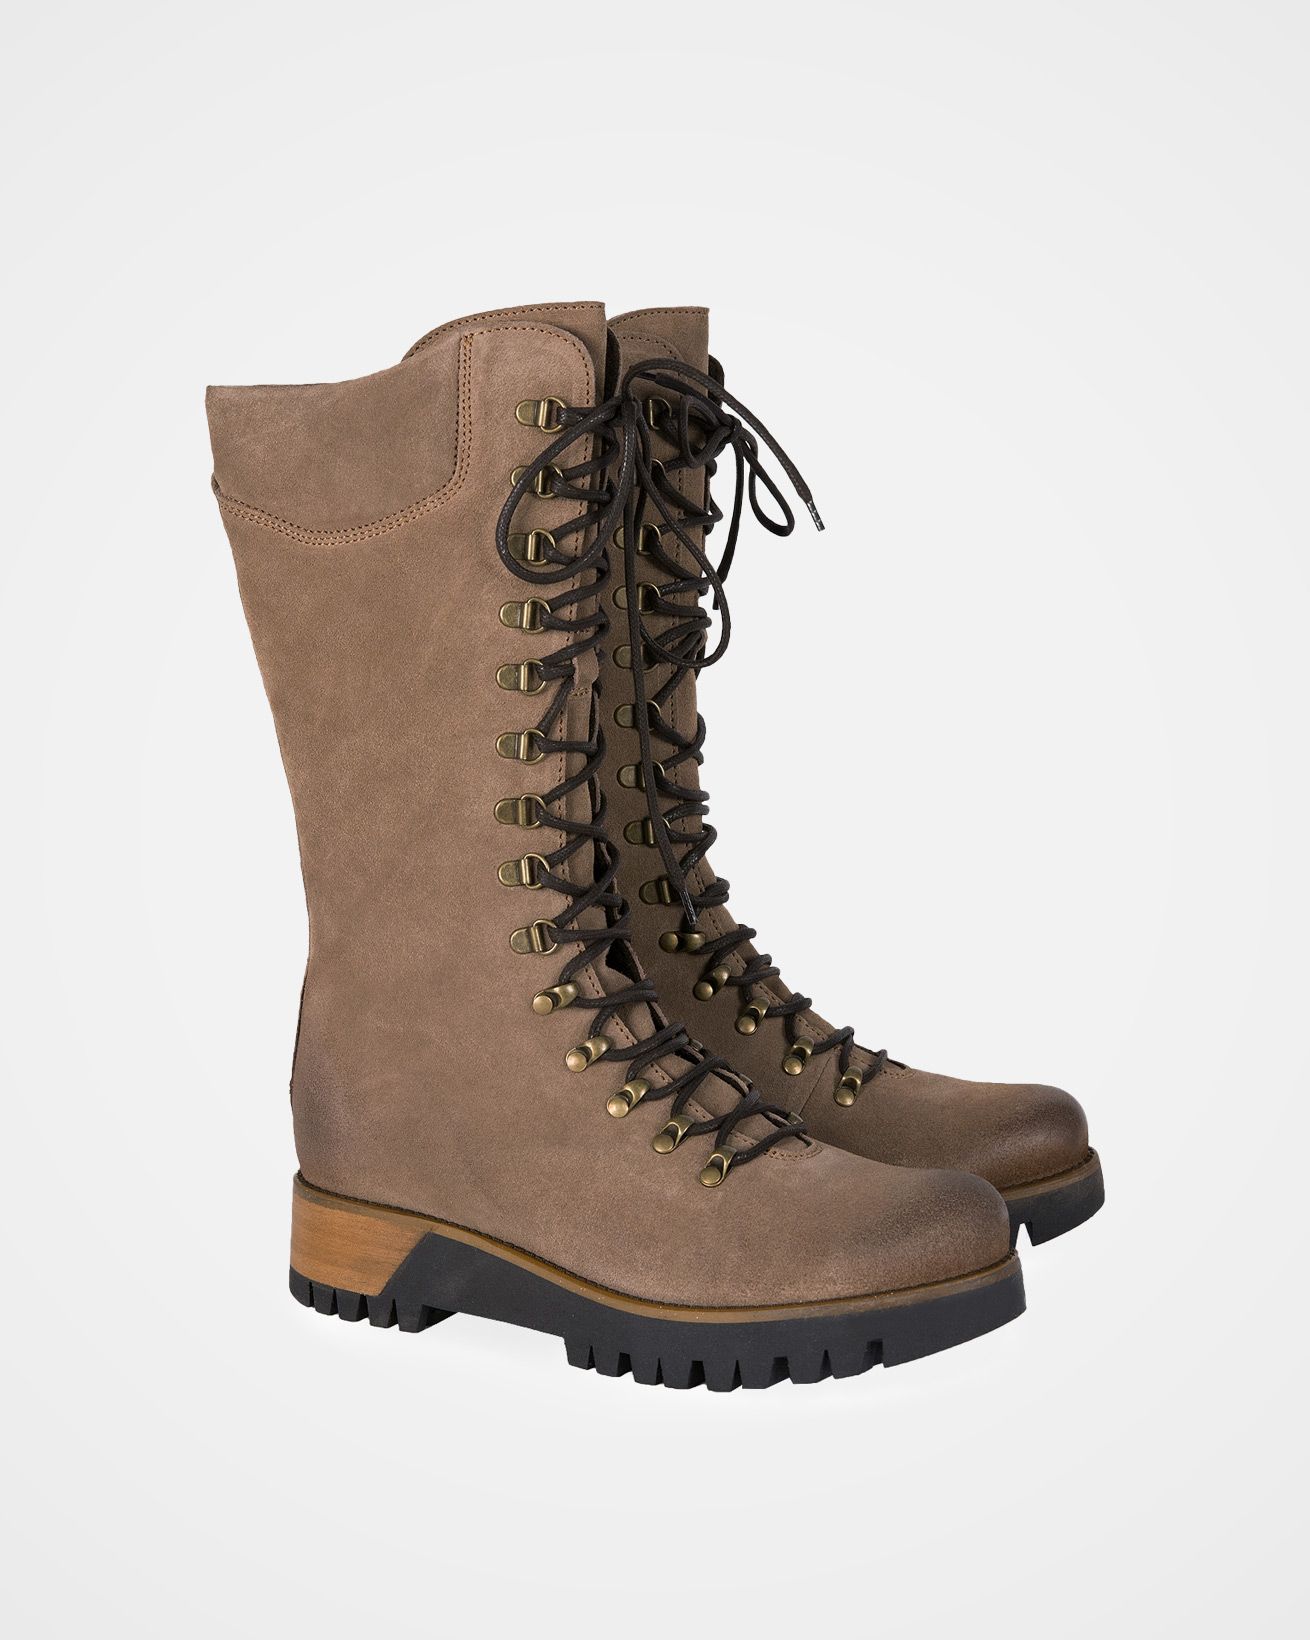 7082_wilderness-boots_taupe_pair.jpg